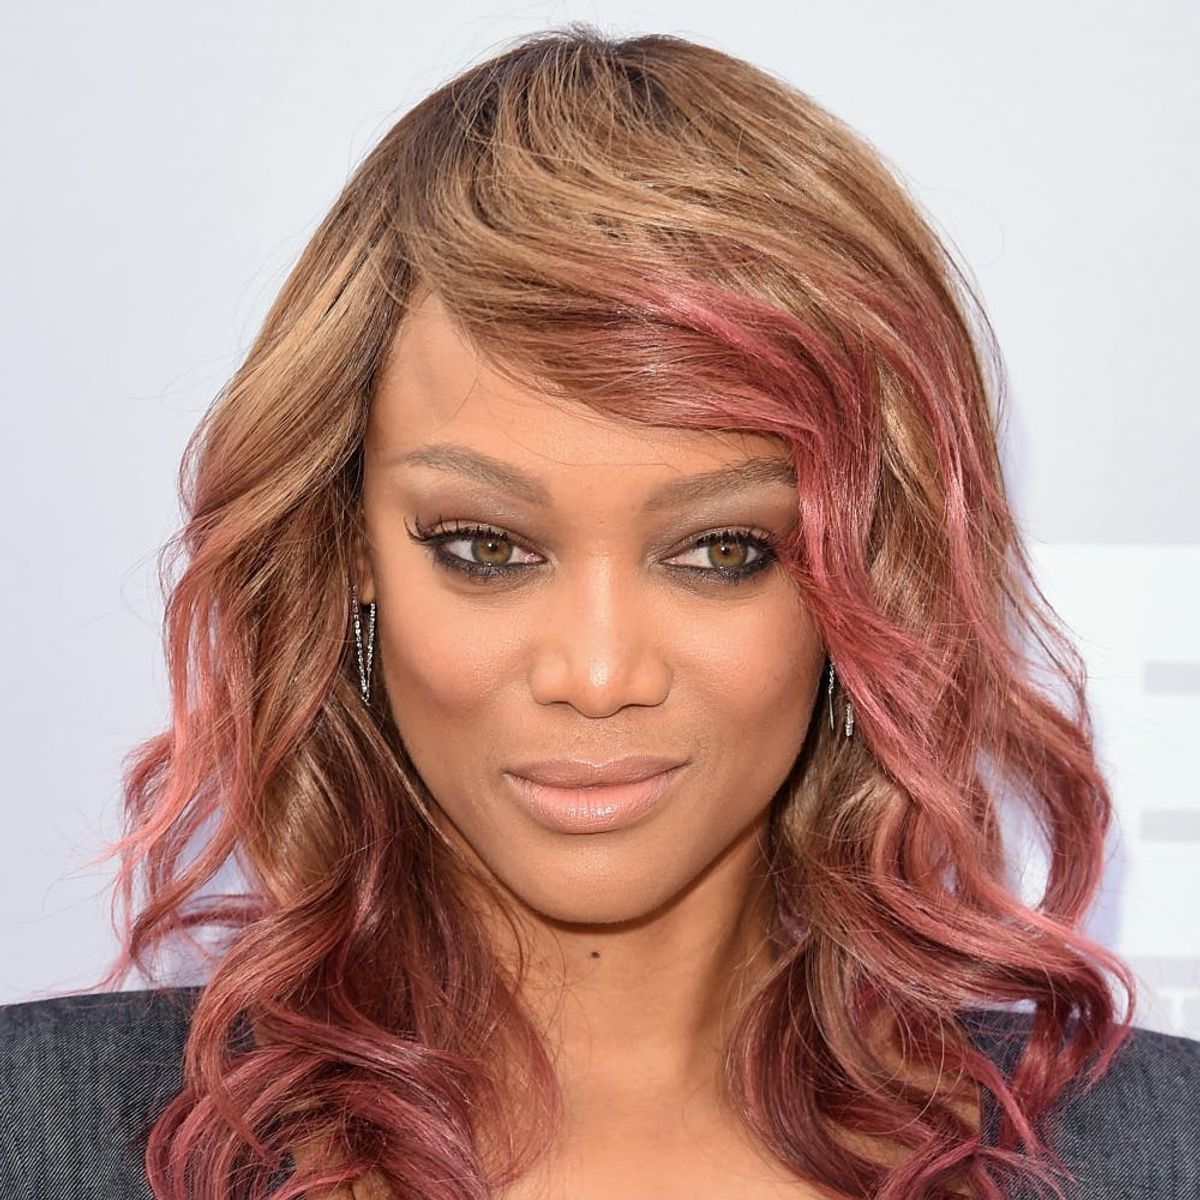 Tyra Banks Just Gloriously Weighed in on the Kendall and Gigi “Model War”